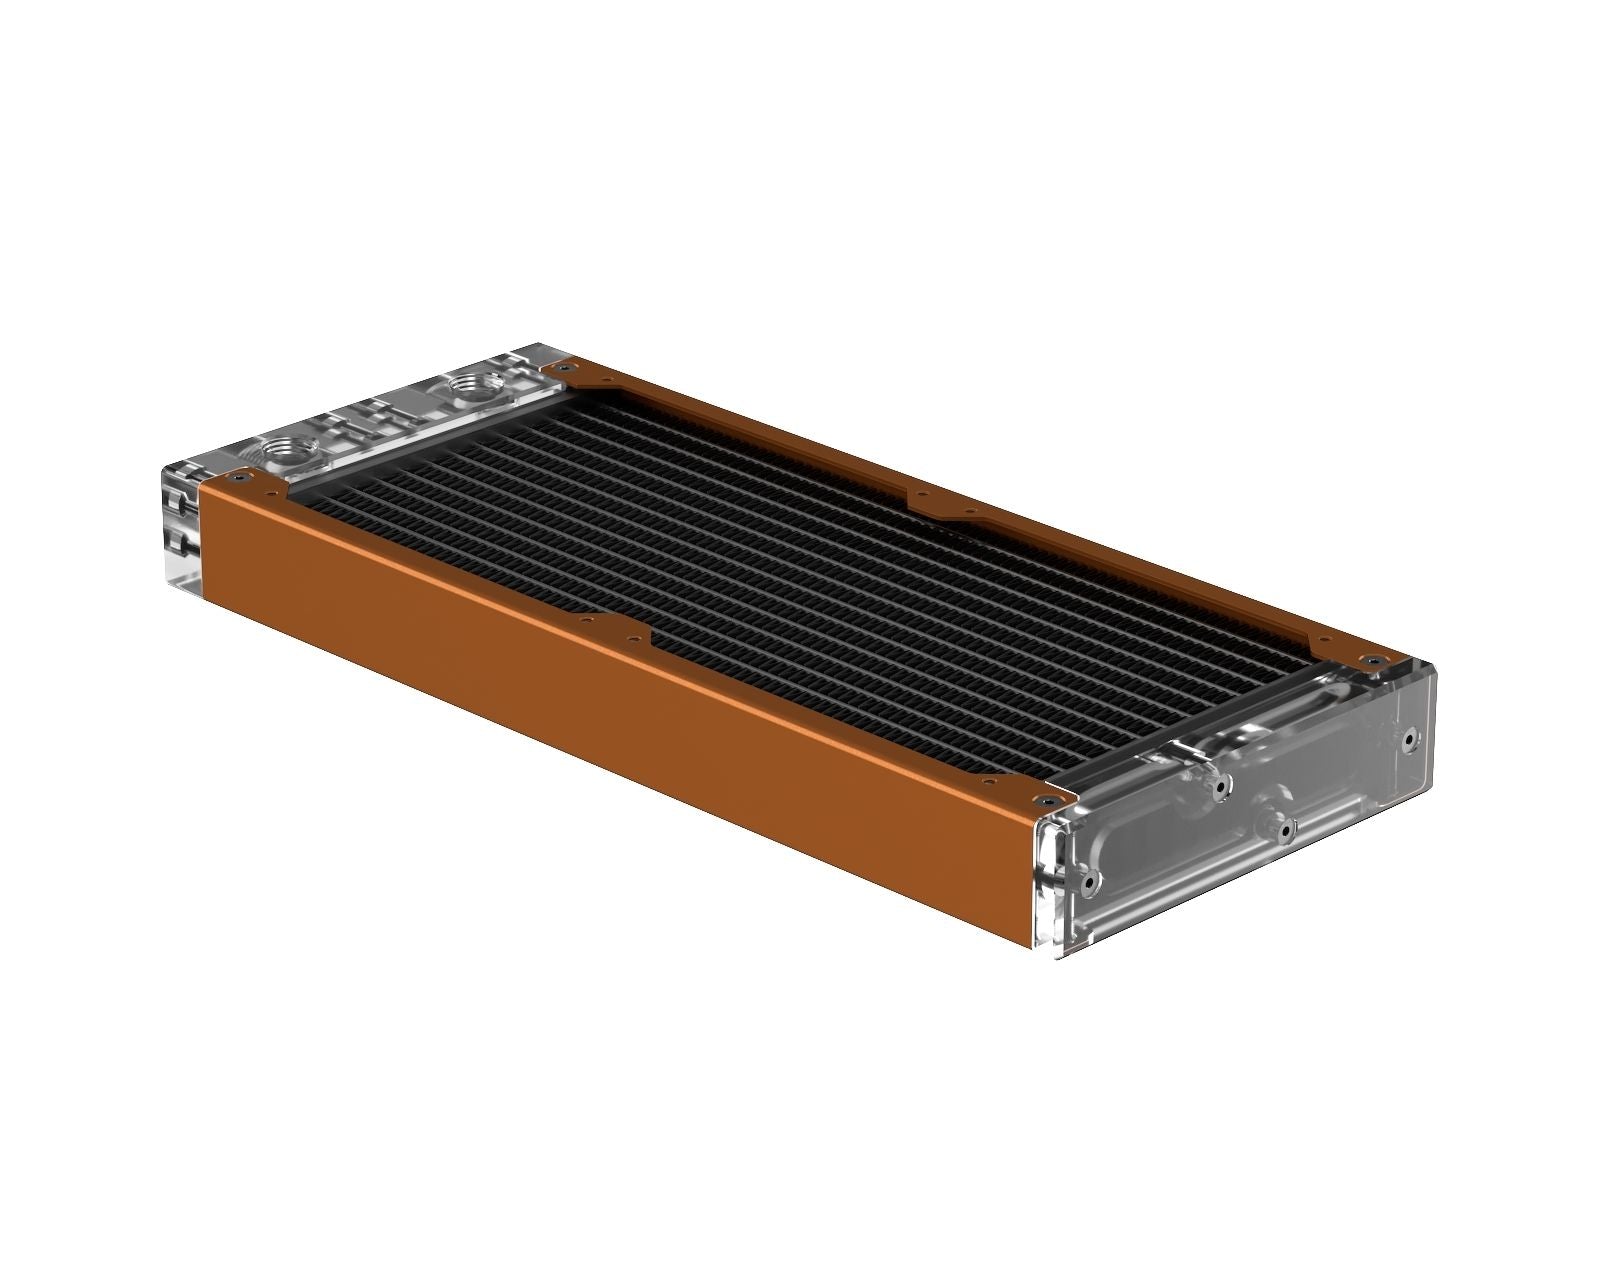 PrimoChill 240SL (30mm) EXIMO Modular Radiator, Clear Acrylic, 2x120mm, Dual Fan (R-SL-A24) Available in 20+ Colors, Assembled in USA and Custom Watercooling Loop Ready - Copper